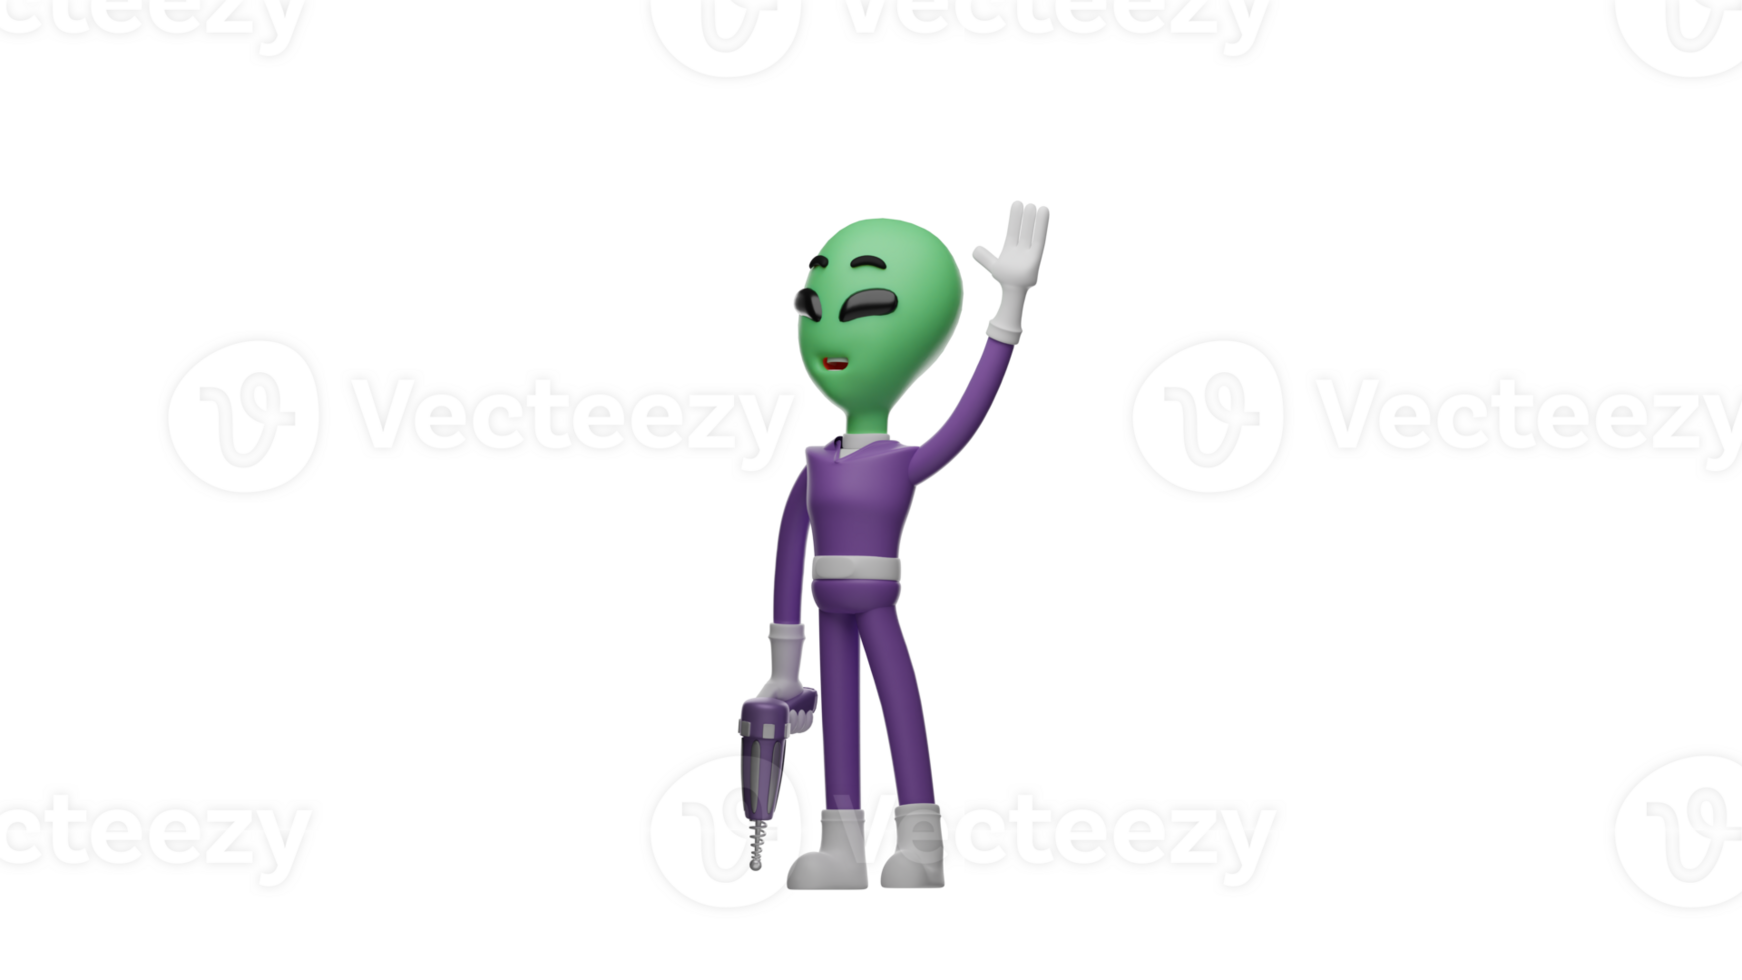 3D illustration. Green Alien 3D cartoon character. The alien waved one hand at someone. The alien carried his gun and showed a friendly smile. 3D cartoon character png